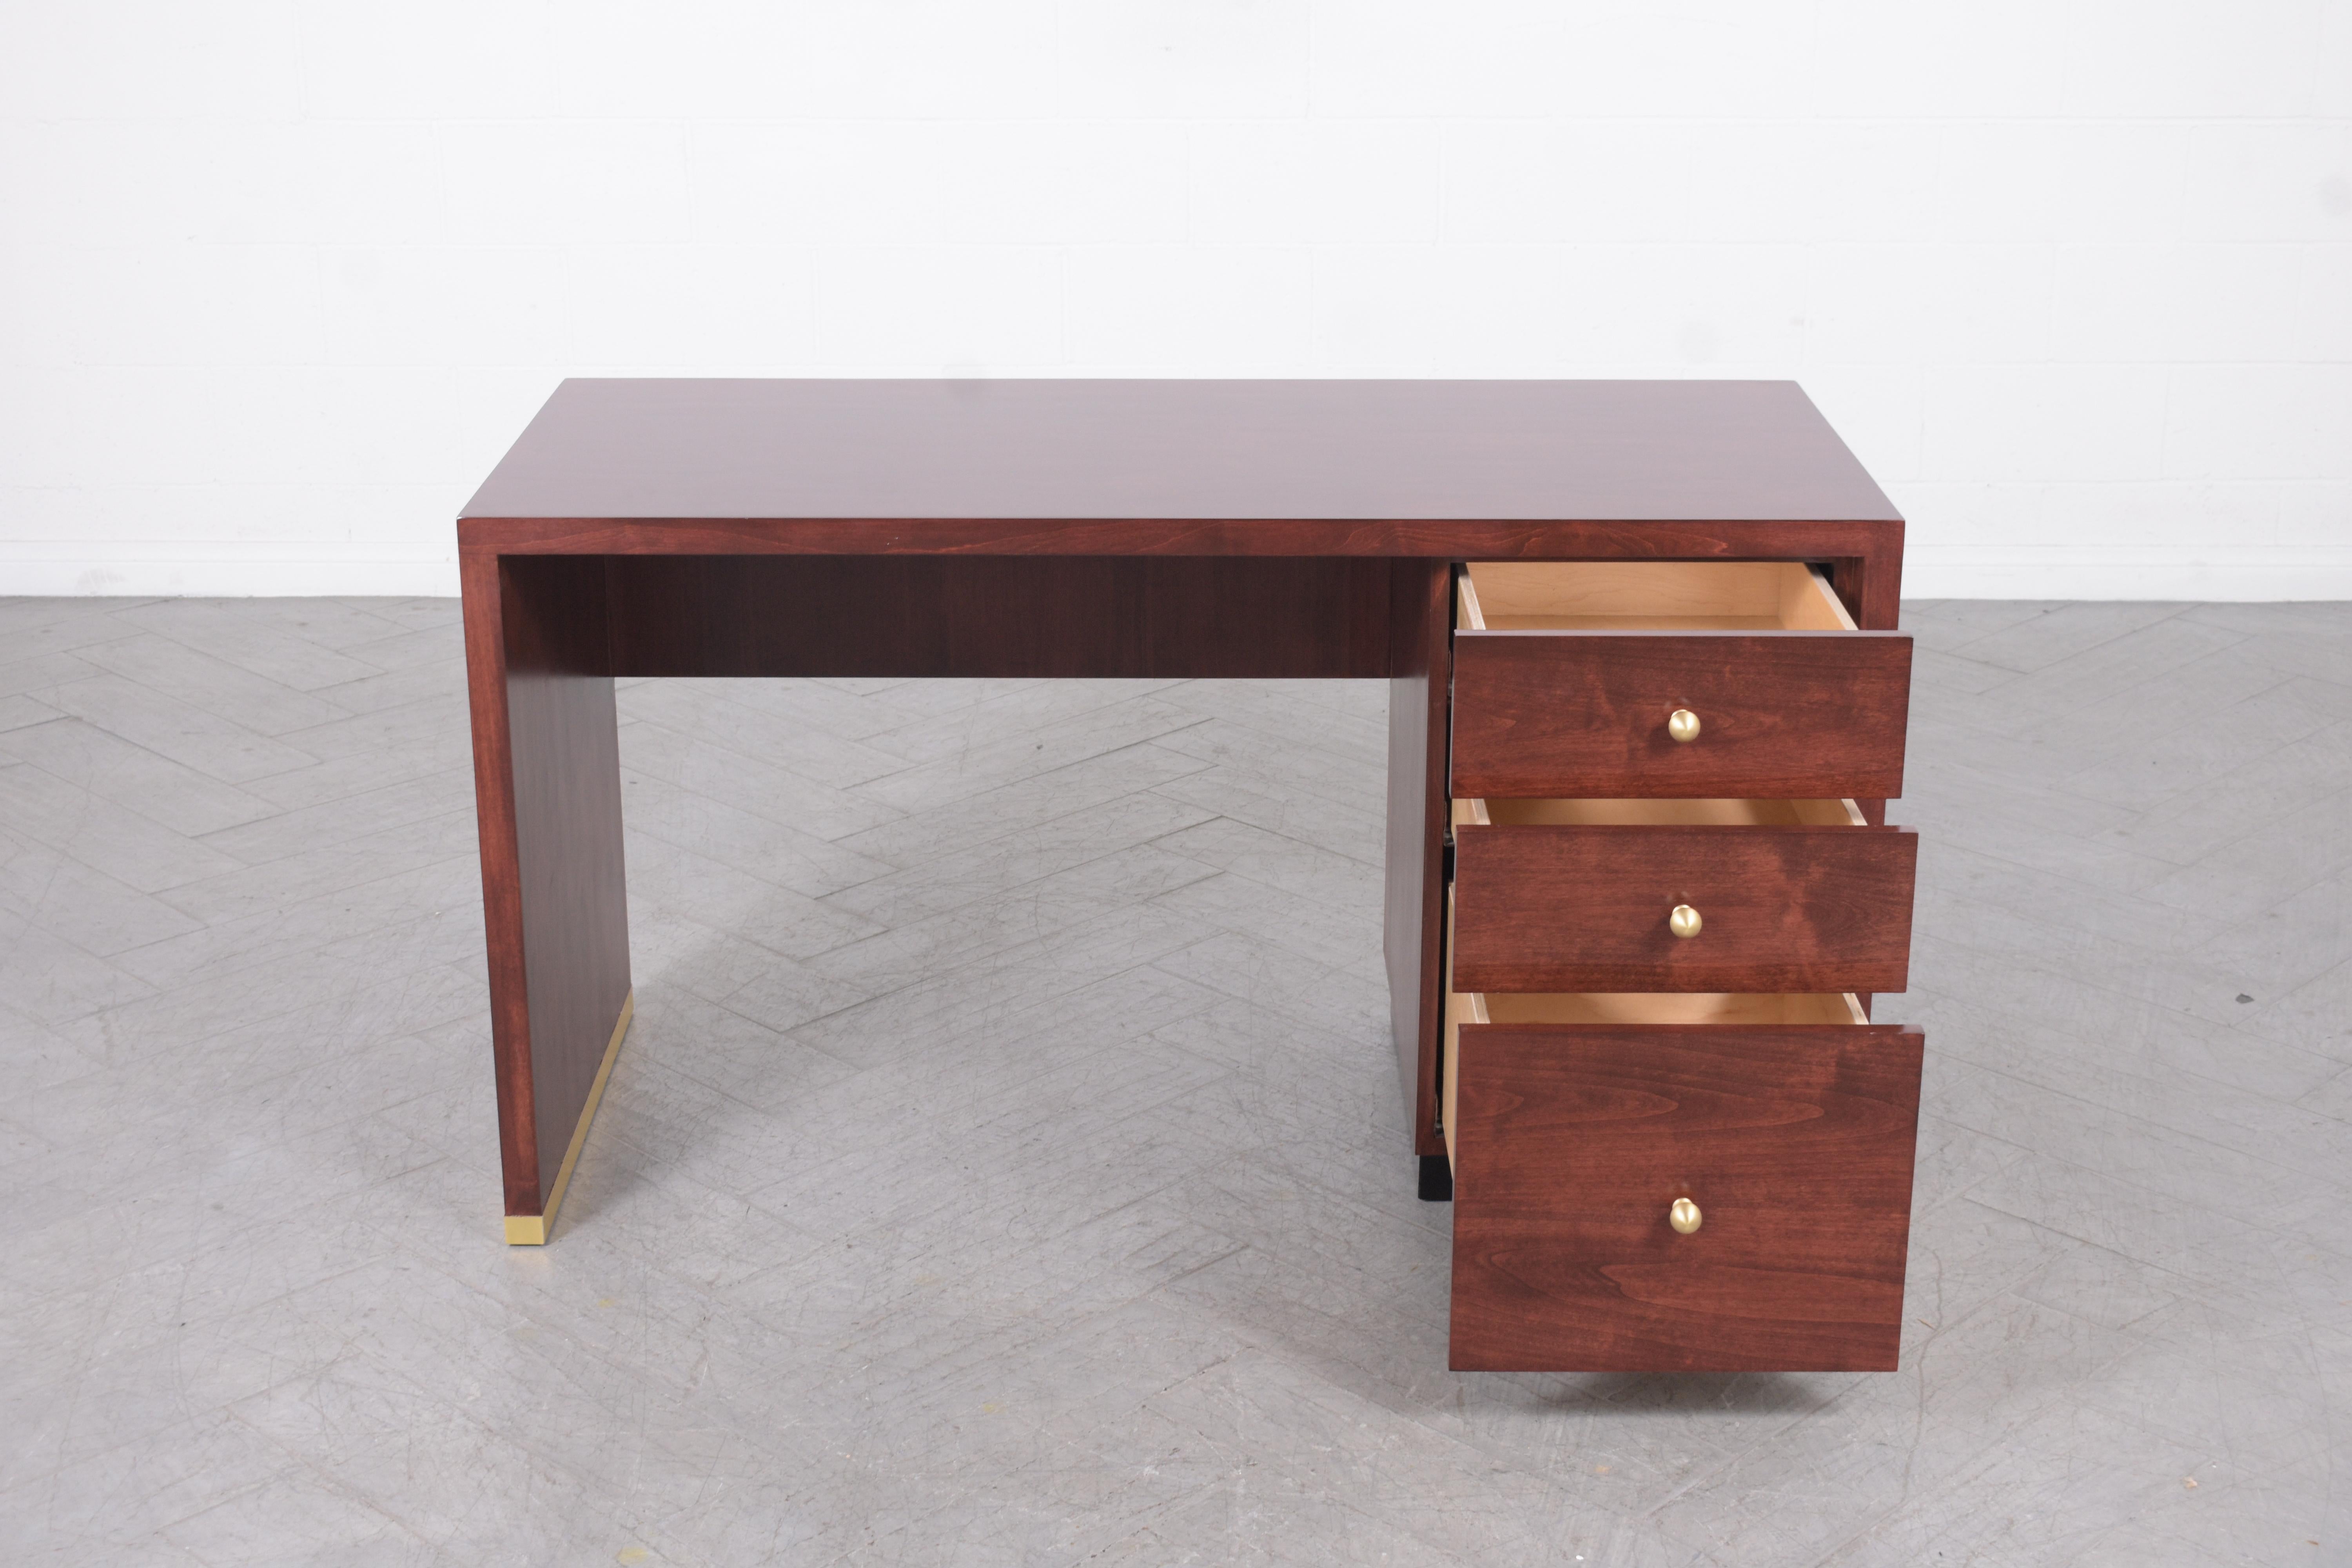 1970s Vintage Mid-Century Modern Mahogany Desk: Timeless Elegance & Quality In Good Condition For Sale In Los Angeles, CA